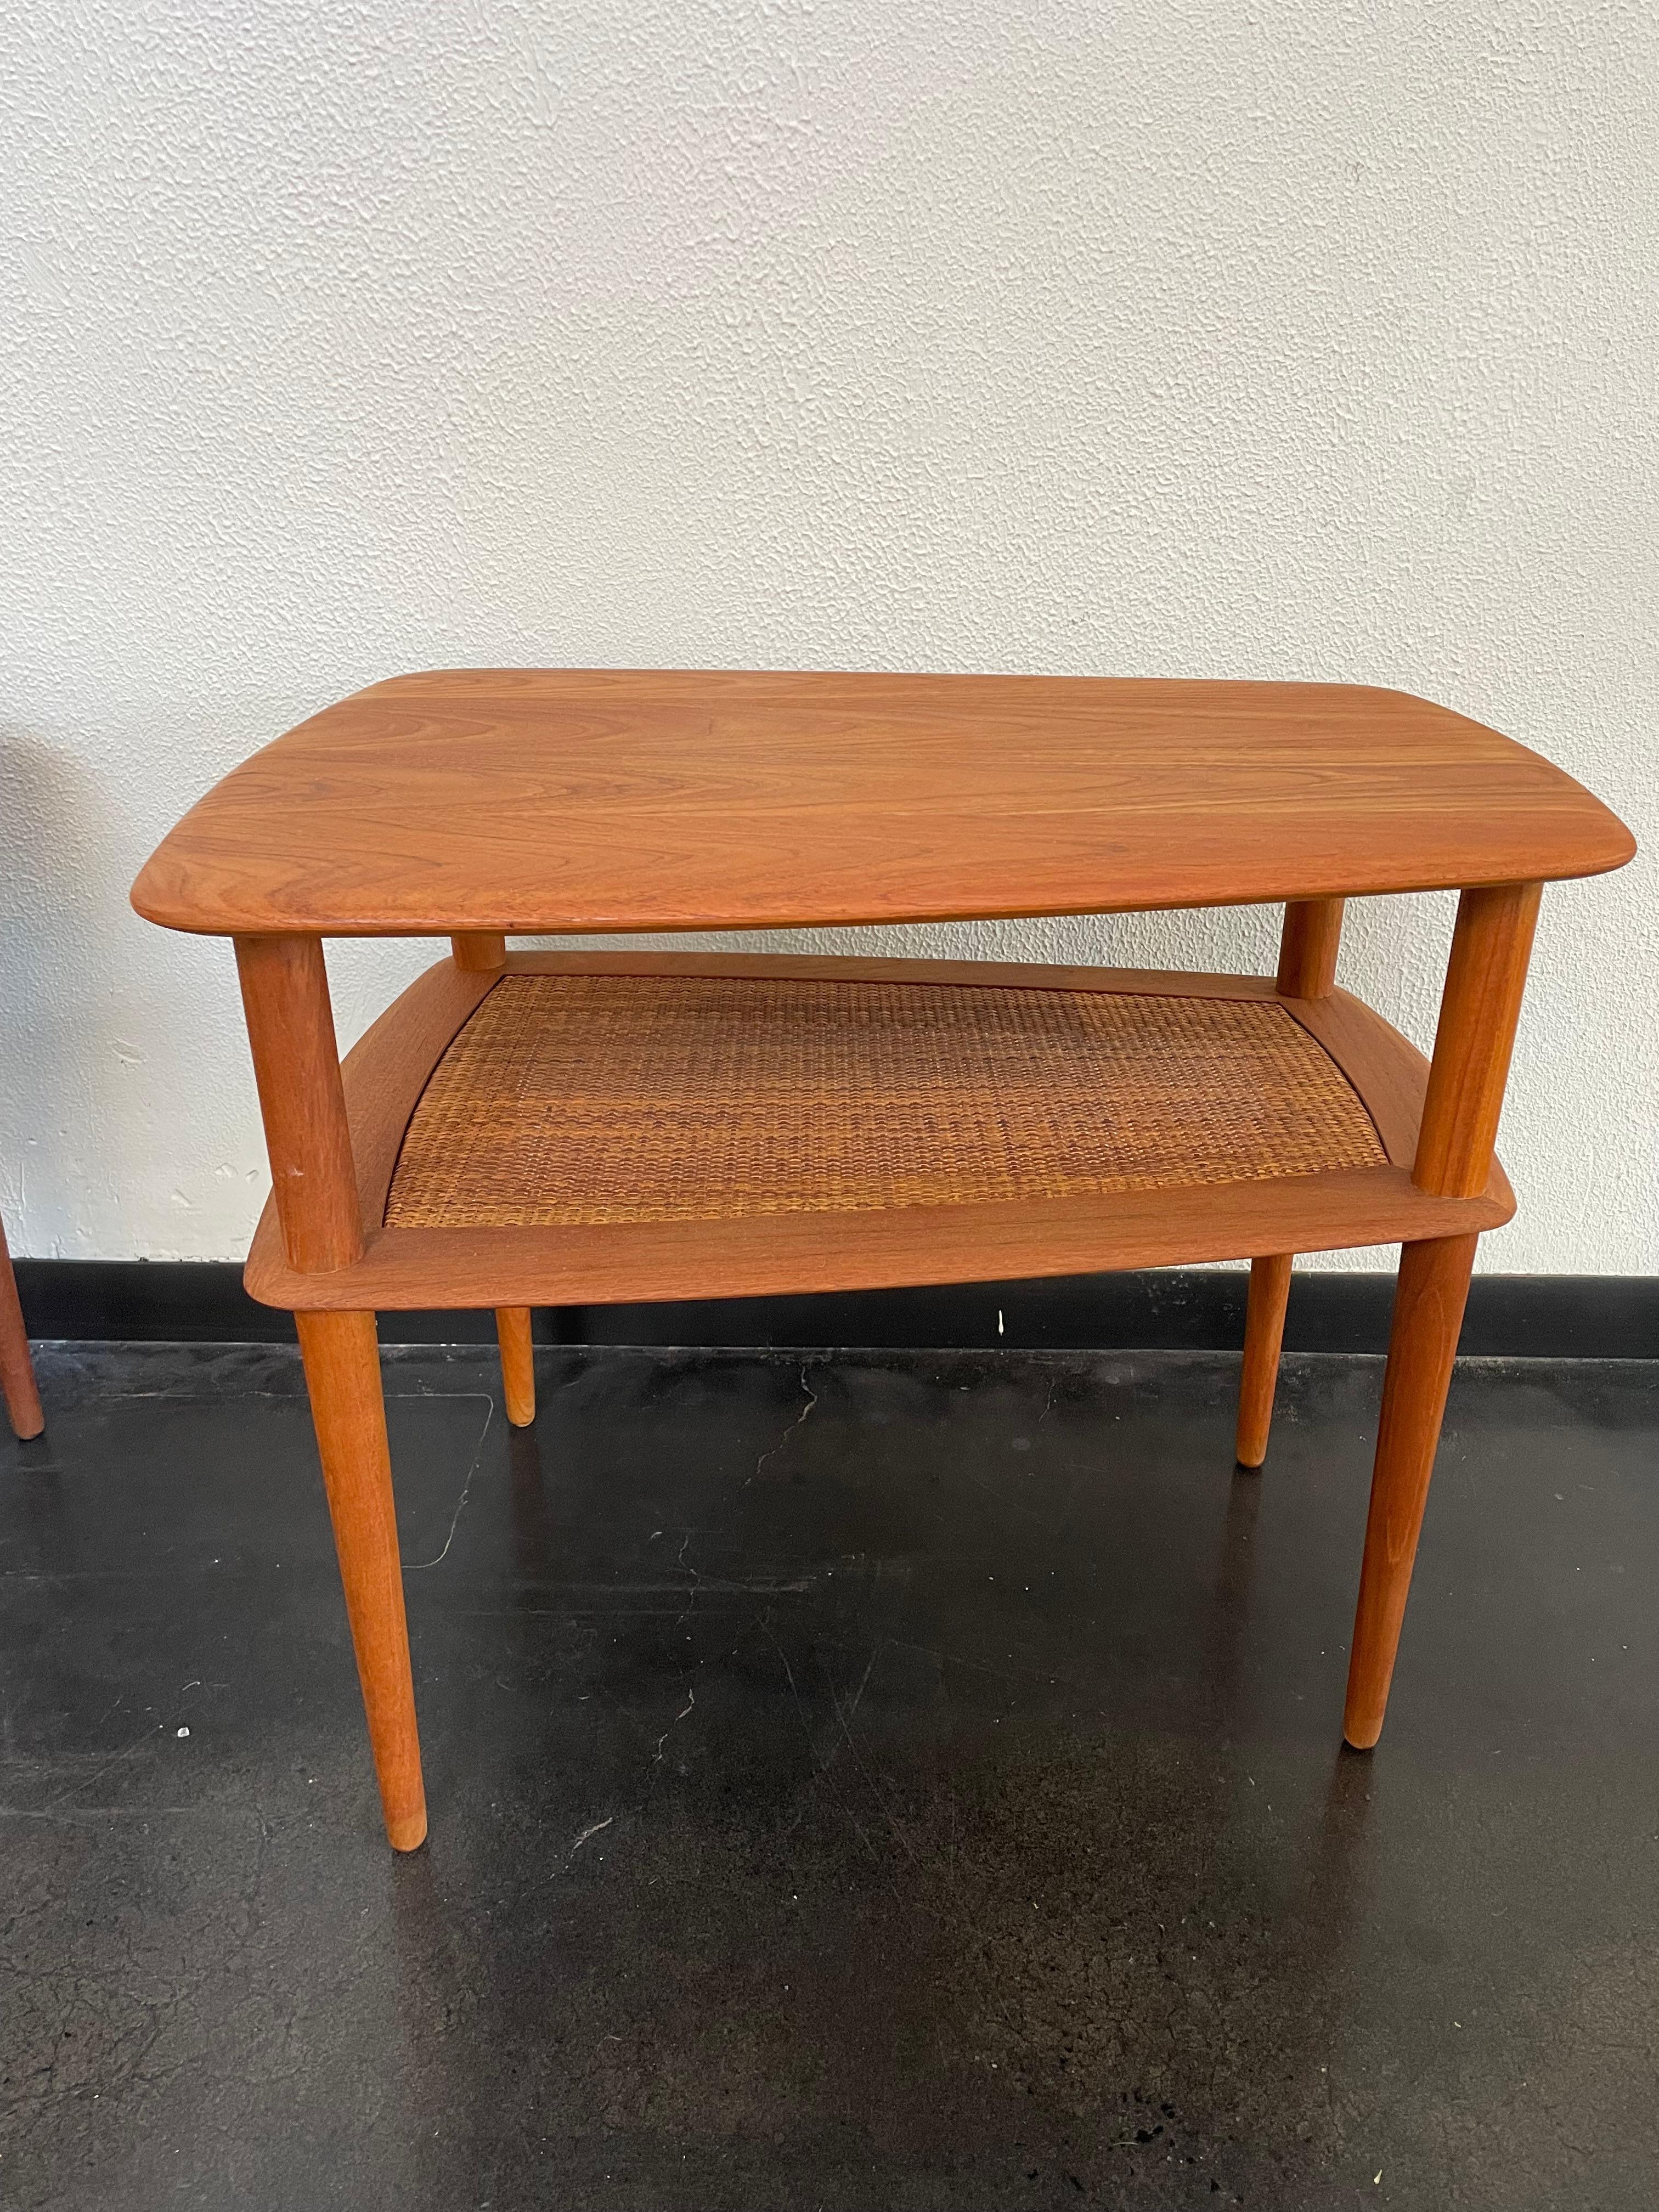 Mid-Century Modern Danish Peter Hvidt France and Son Teak End Tables, a Pair For Sale